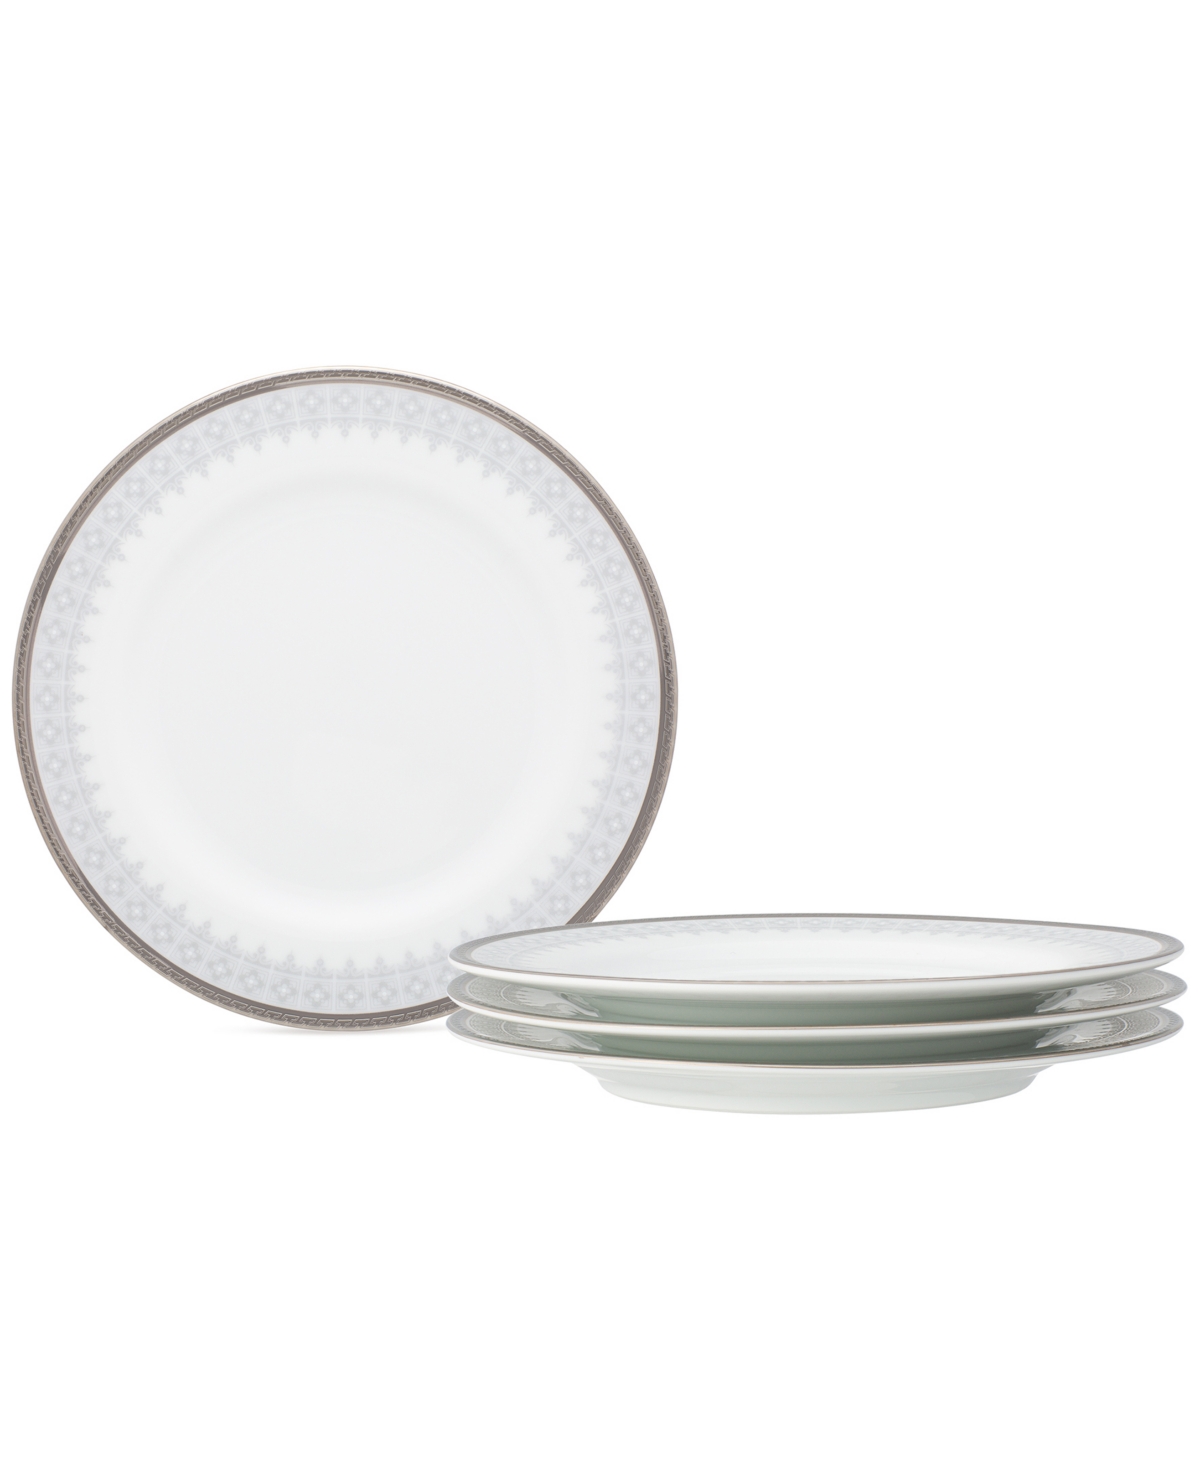 Noritake Silver Colonnade 4 Piece Bread Butter/appetizer Plates Set, Service For 4 In White